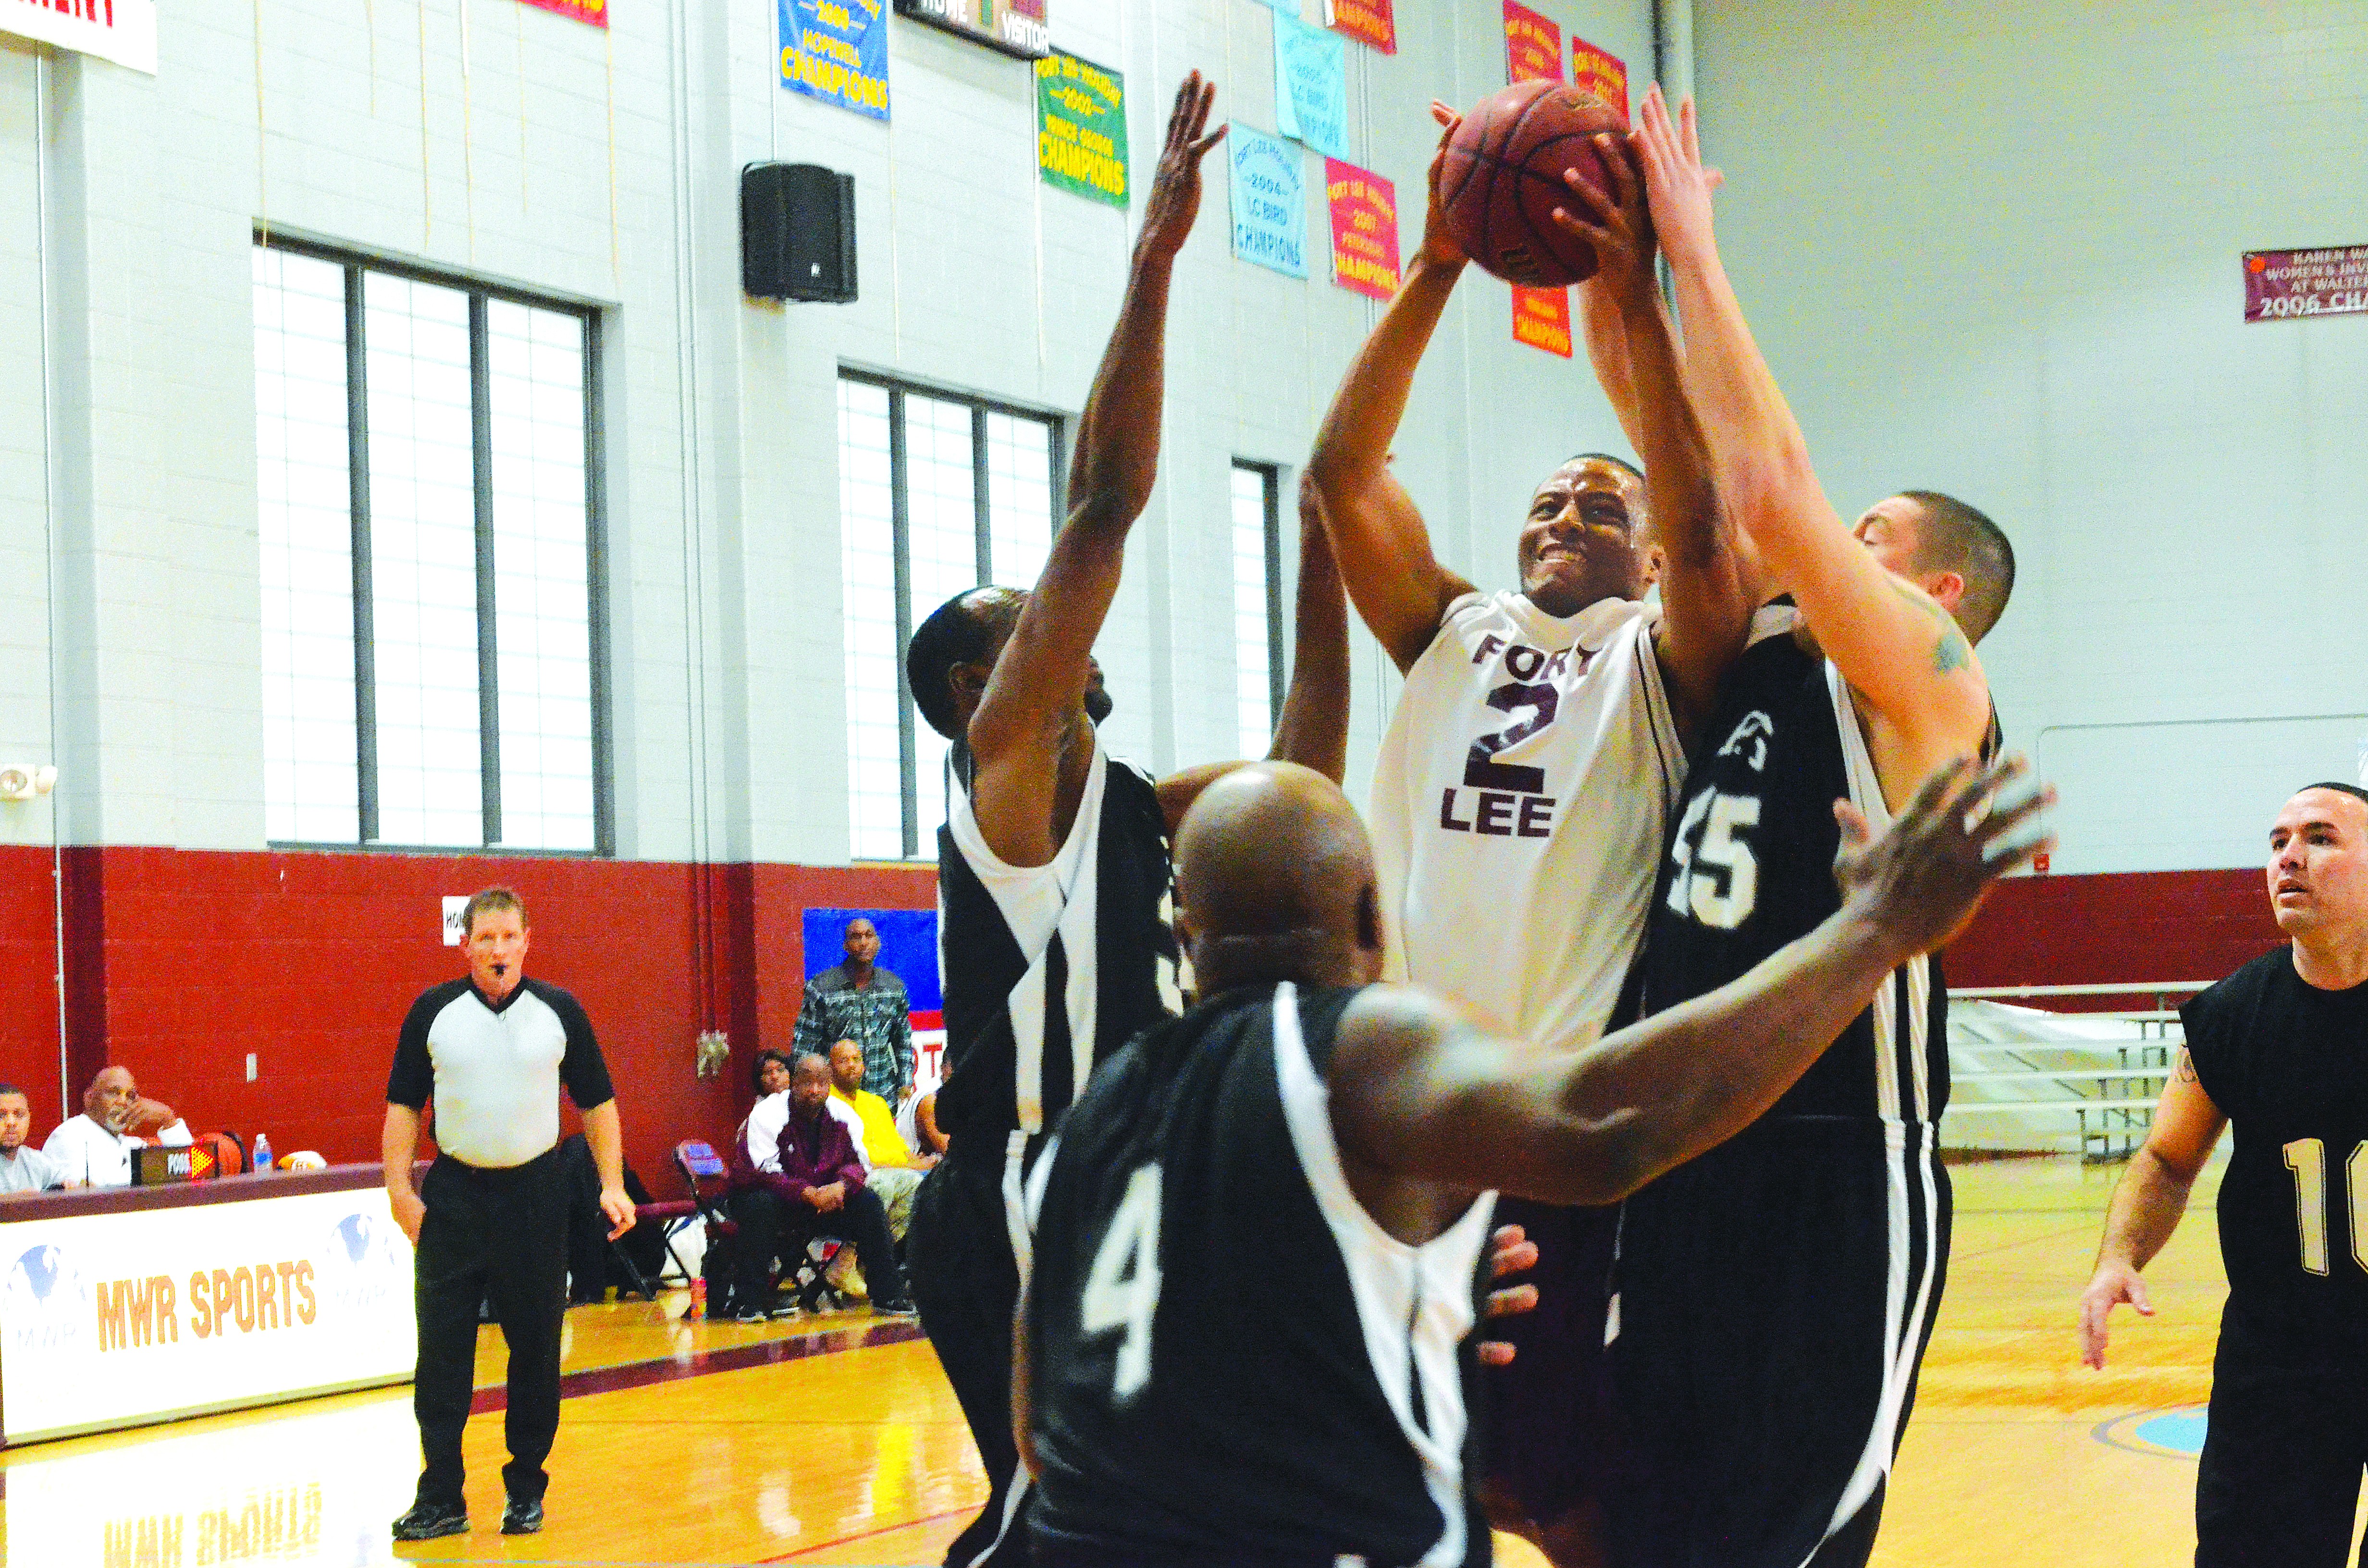 Fort Lee hoops team downs Fort Meade, 78-64 | Article | The United States  Army